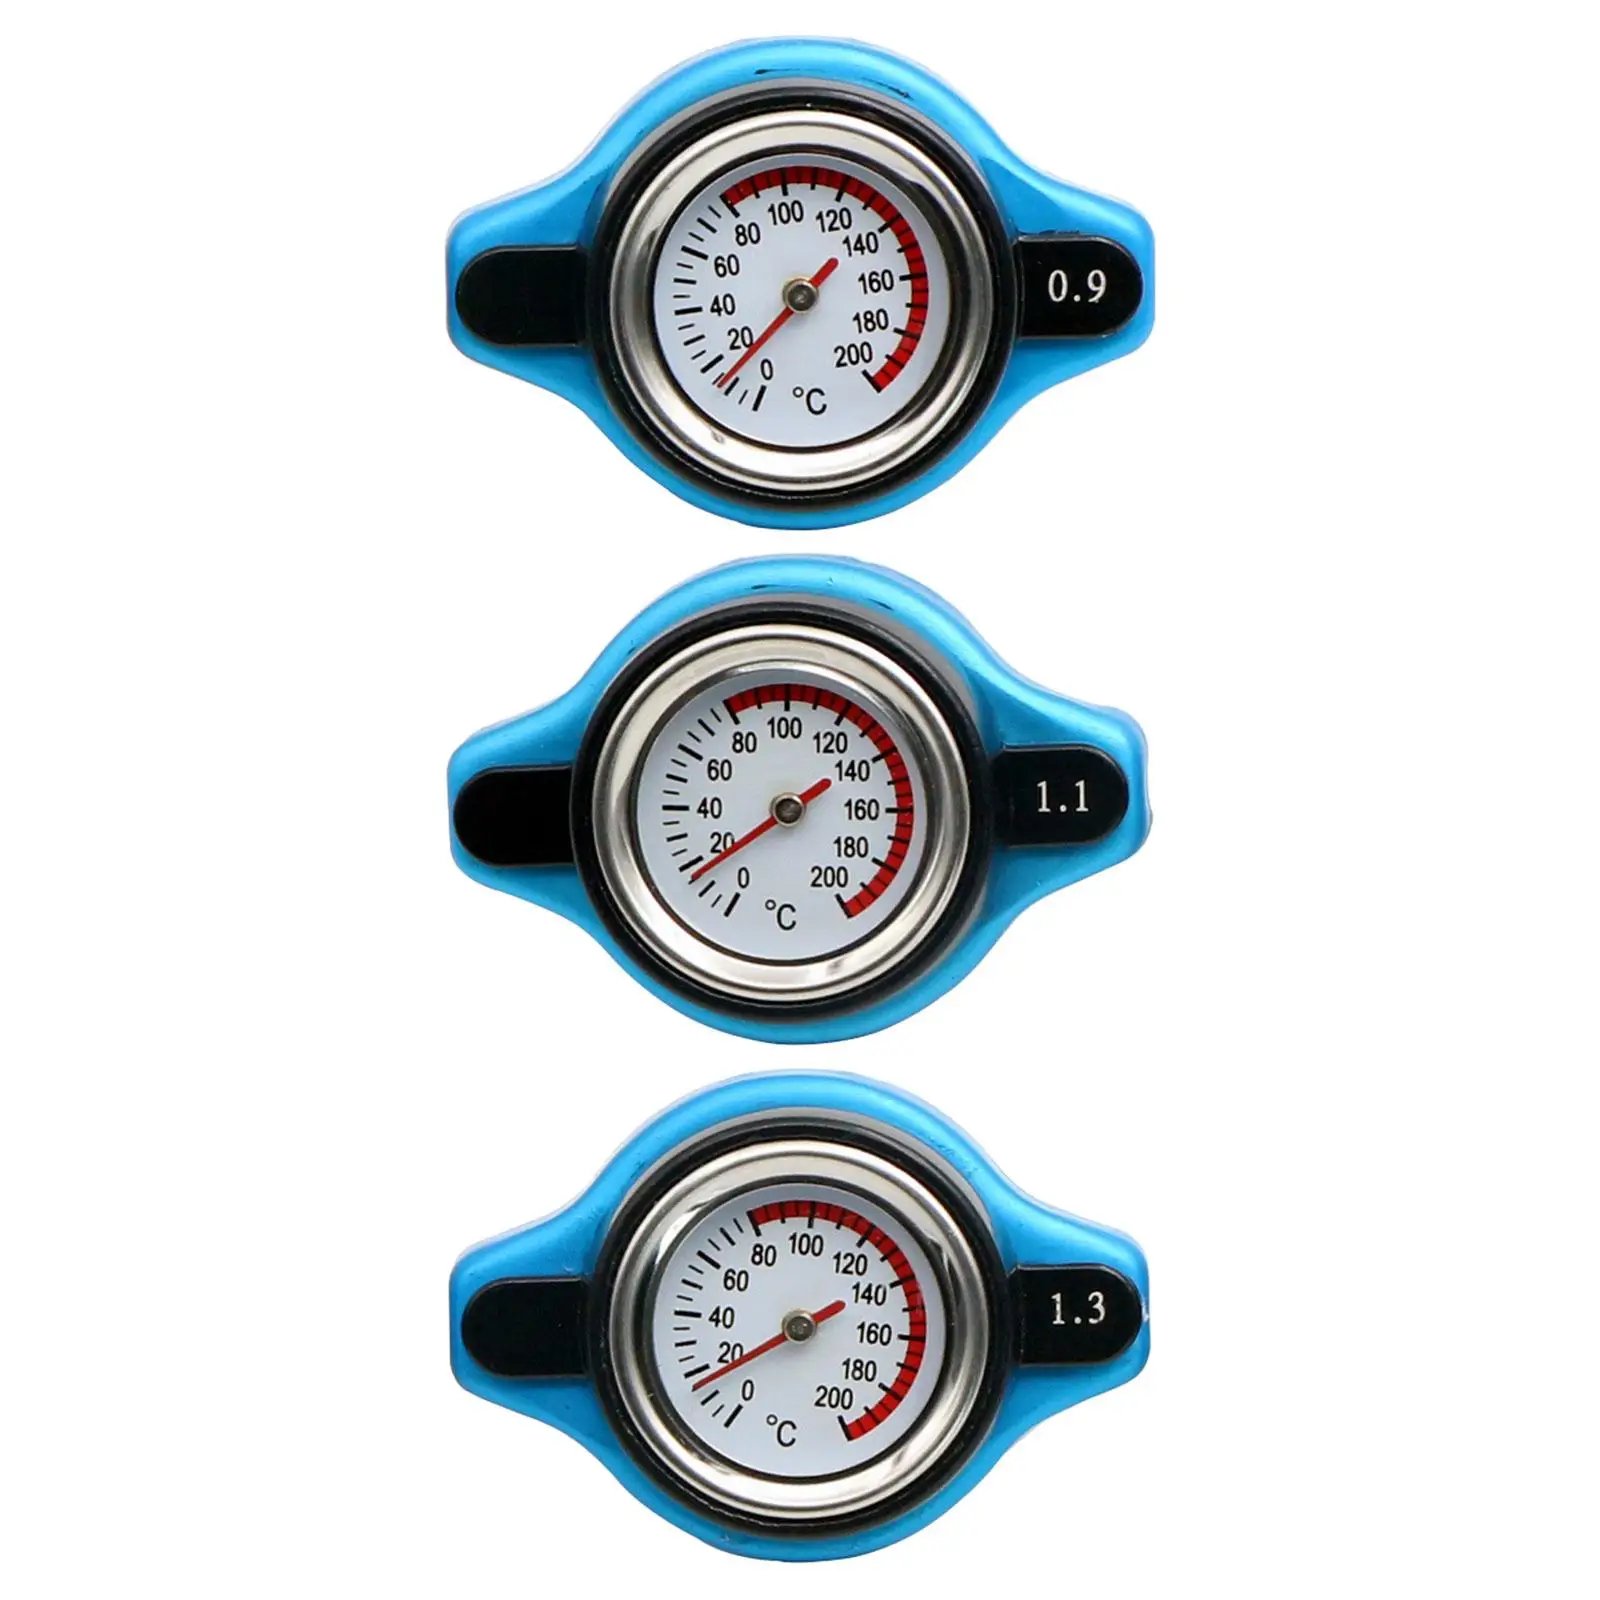 Thermostatic Radiator Cap Water Temp Gauge Meter High Quality Easy to Install Auto Part Sturdy Aluminum Alloy Universal Replace